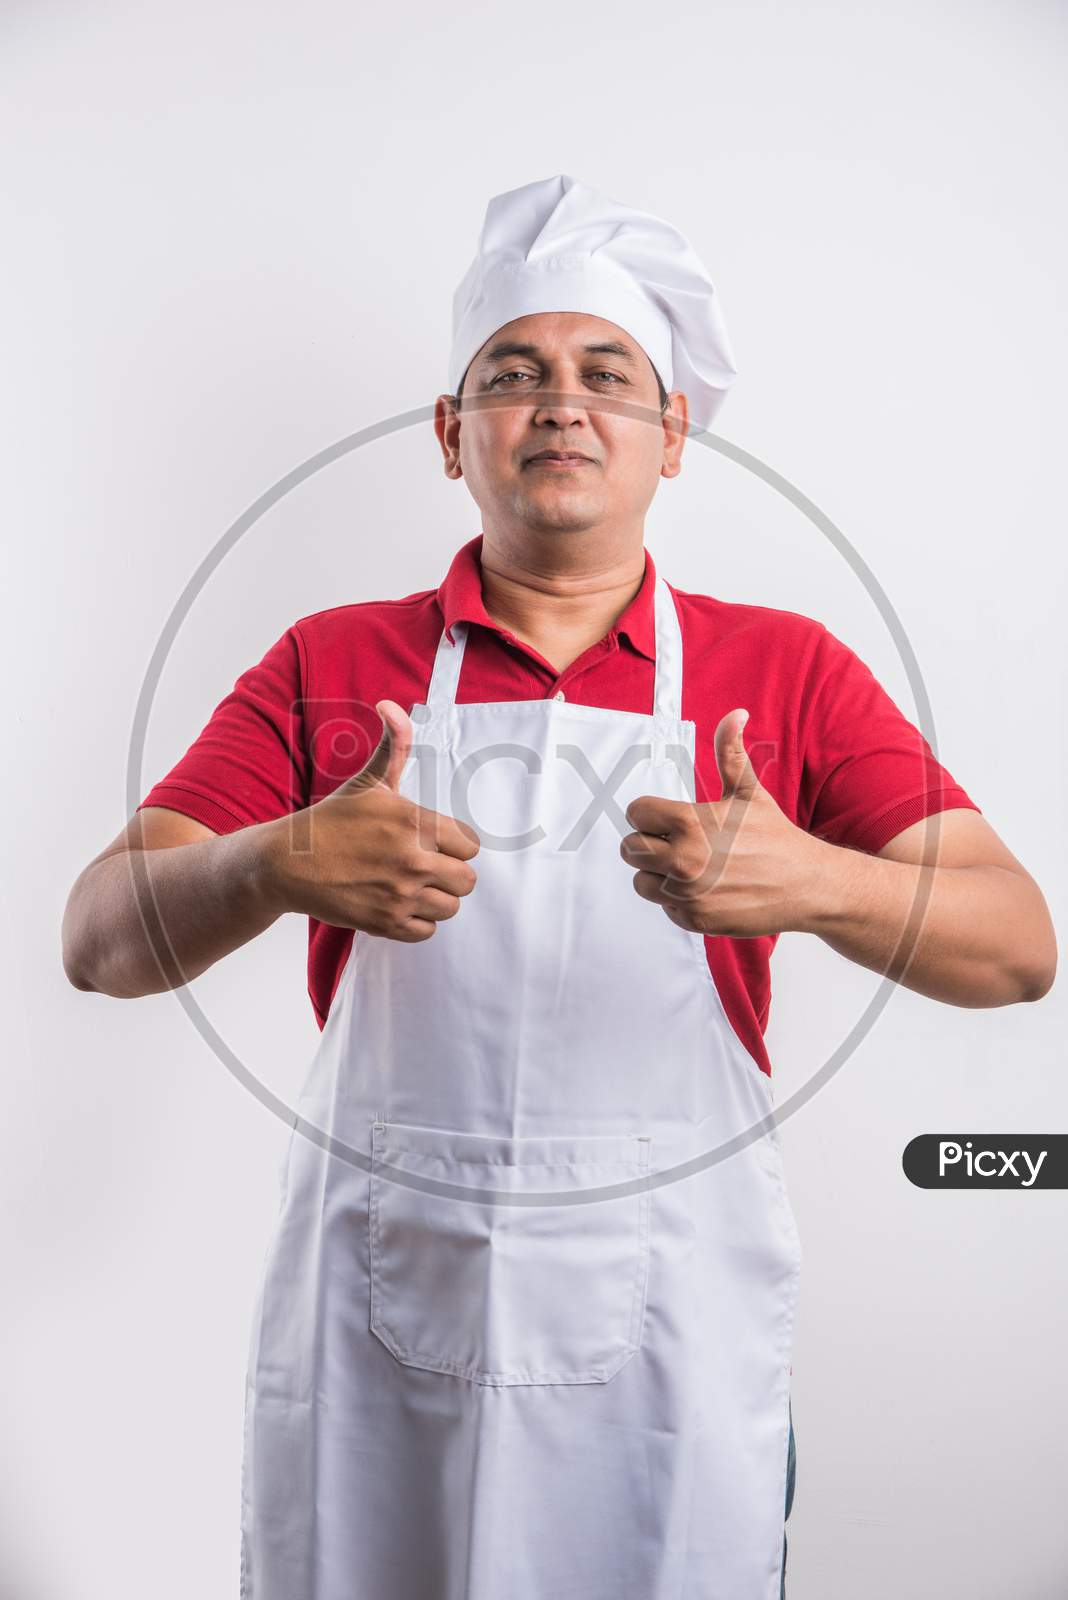 Image Of Indian Male Chef Cook In Apron And Wearing Hat Zr987704 Picxy 